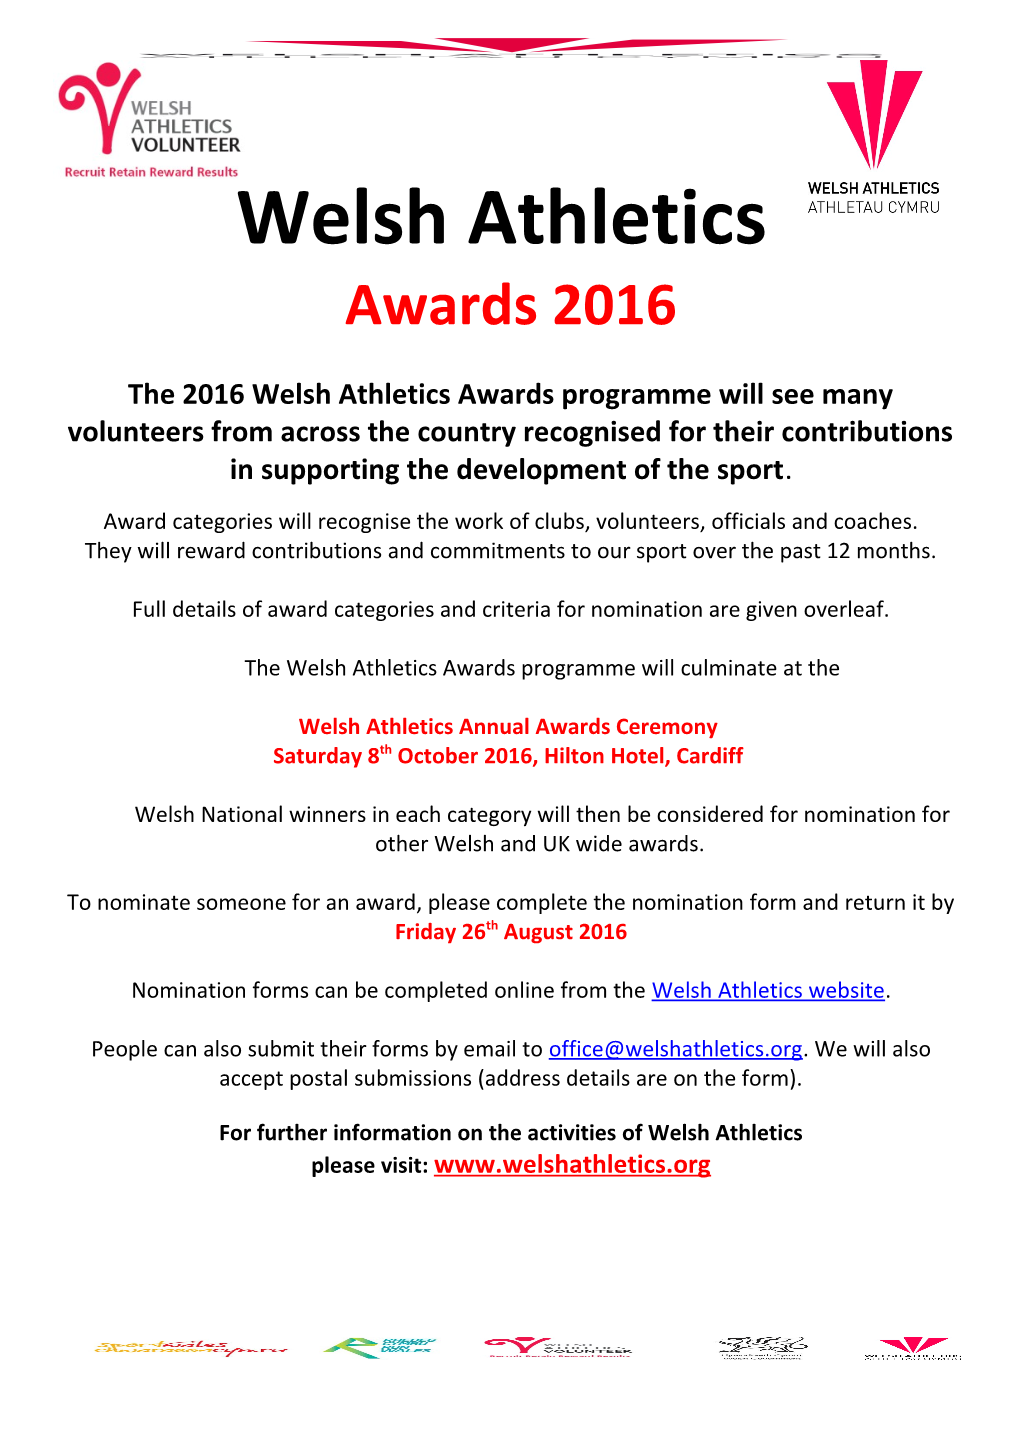 Award Categories Will Recognise the Work of Clubs, Volunteers, Officials and Coaches